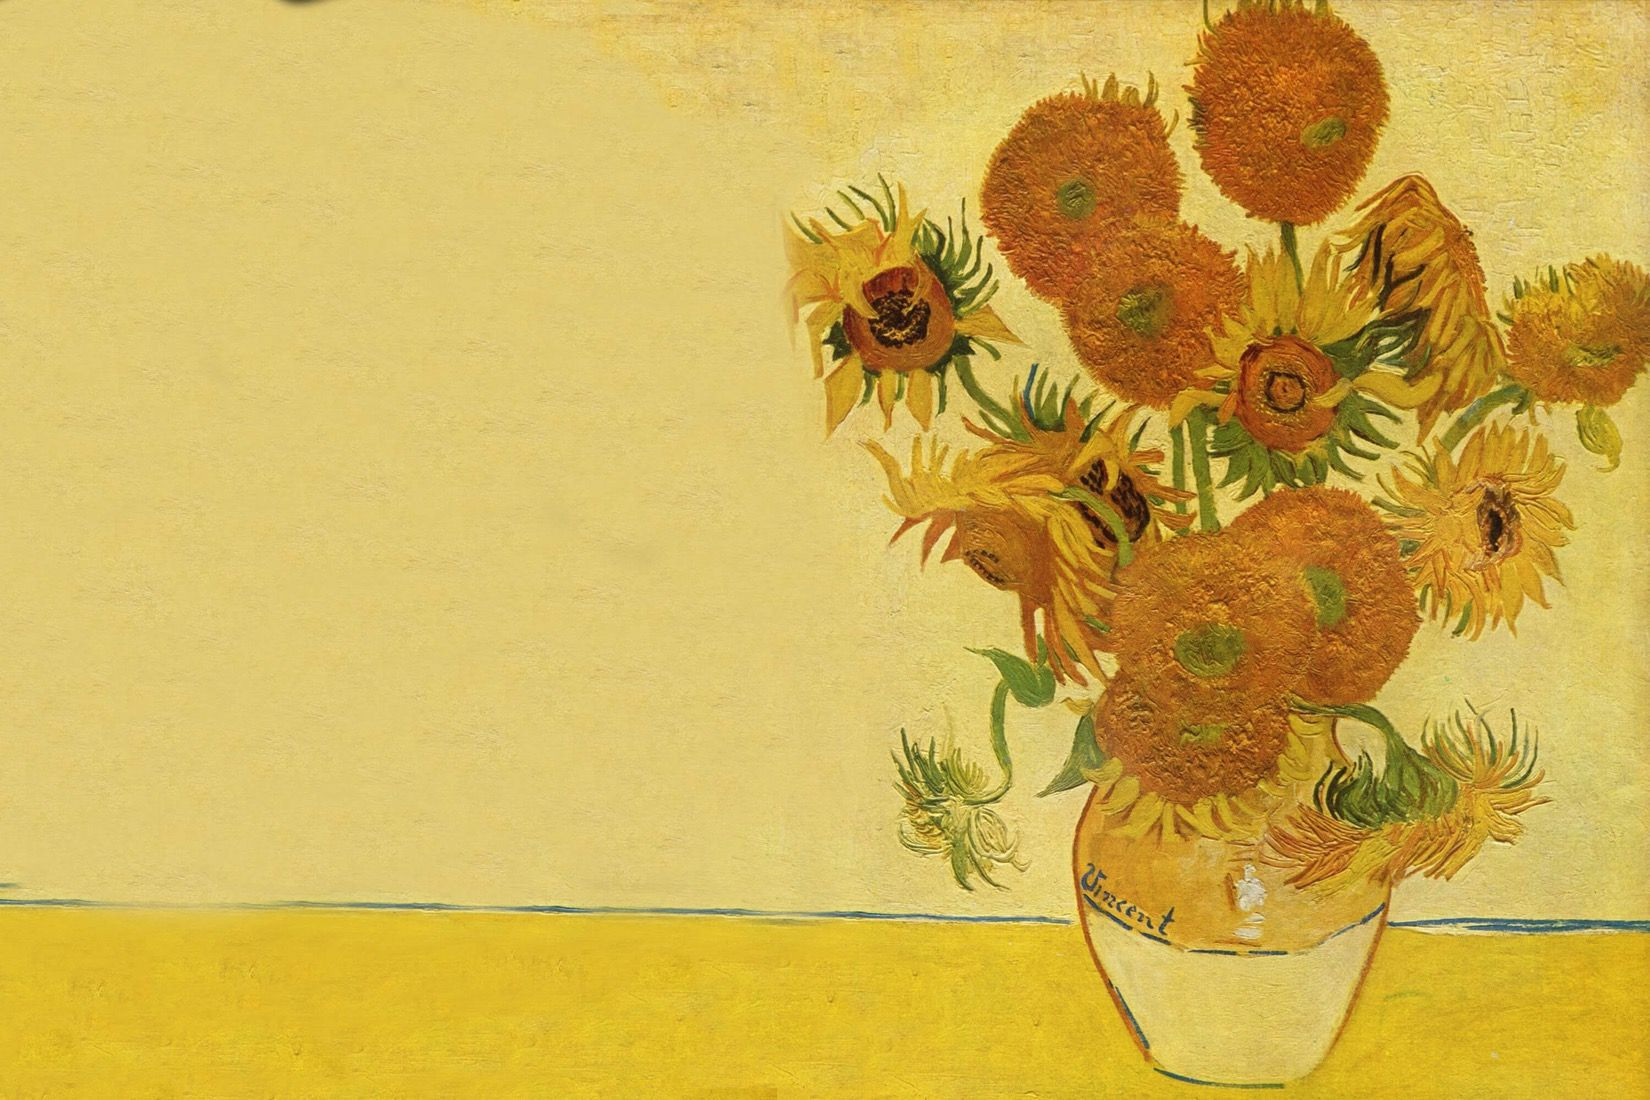 22 attractive Sunflowers In A Vase Van Gogh 2024 free download sunflowers in a vase van gogh of sunflowers by van gogh art wall mural muralswallpaper co uk van pertaining to high quality sunflowers mural custom made to suit your wall size by the uks no